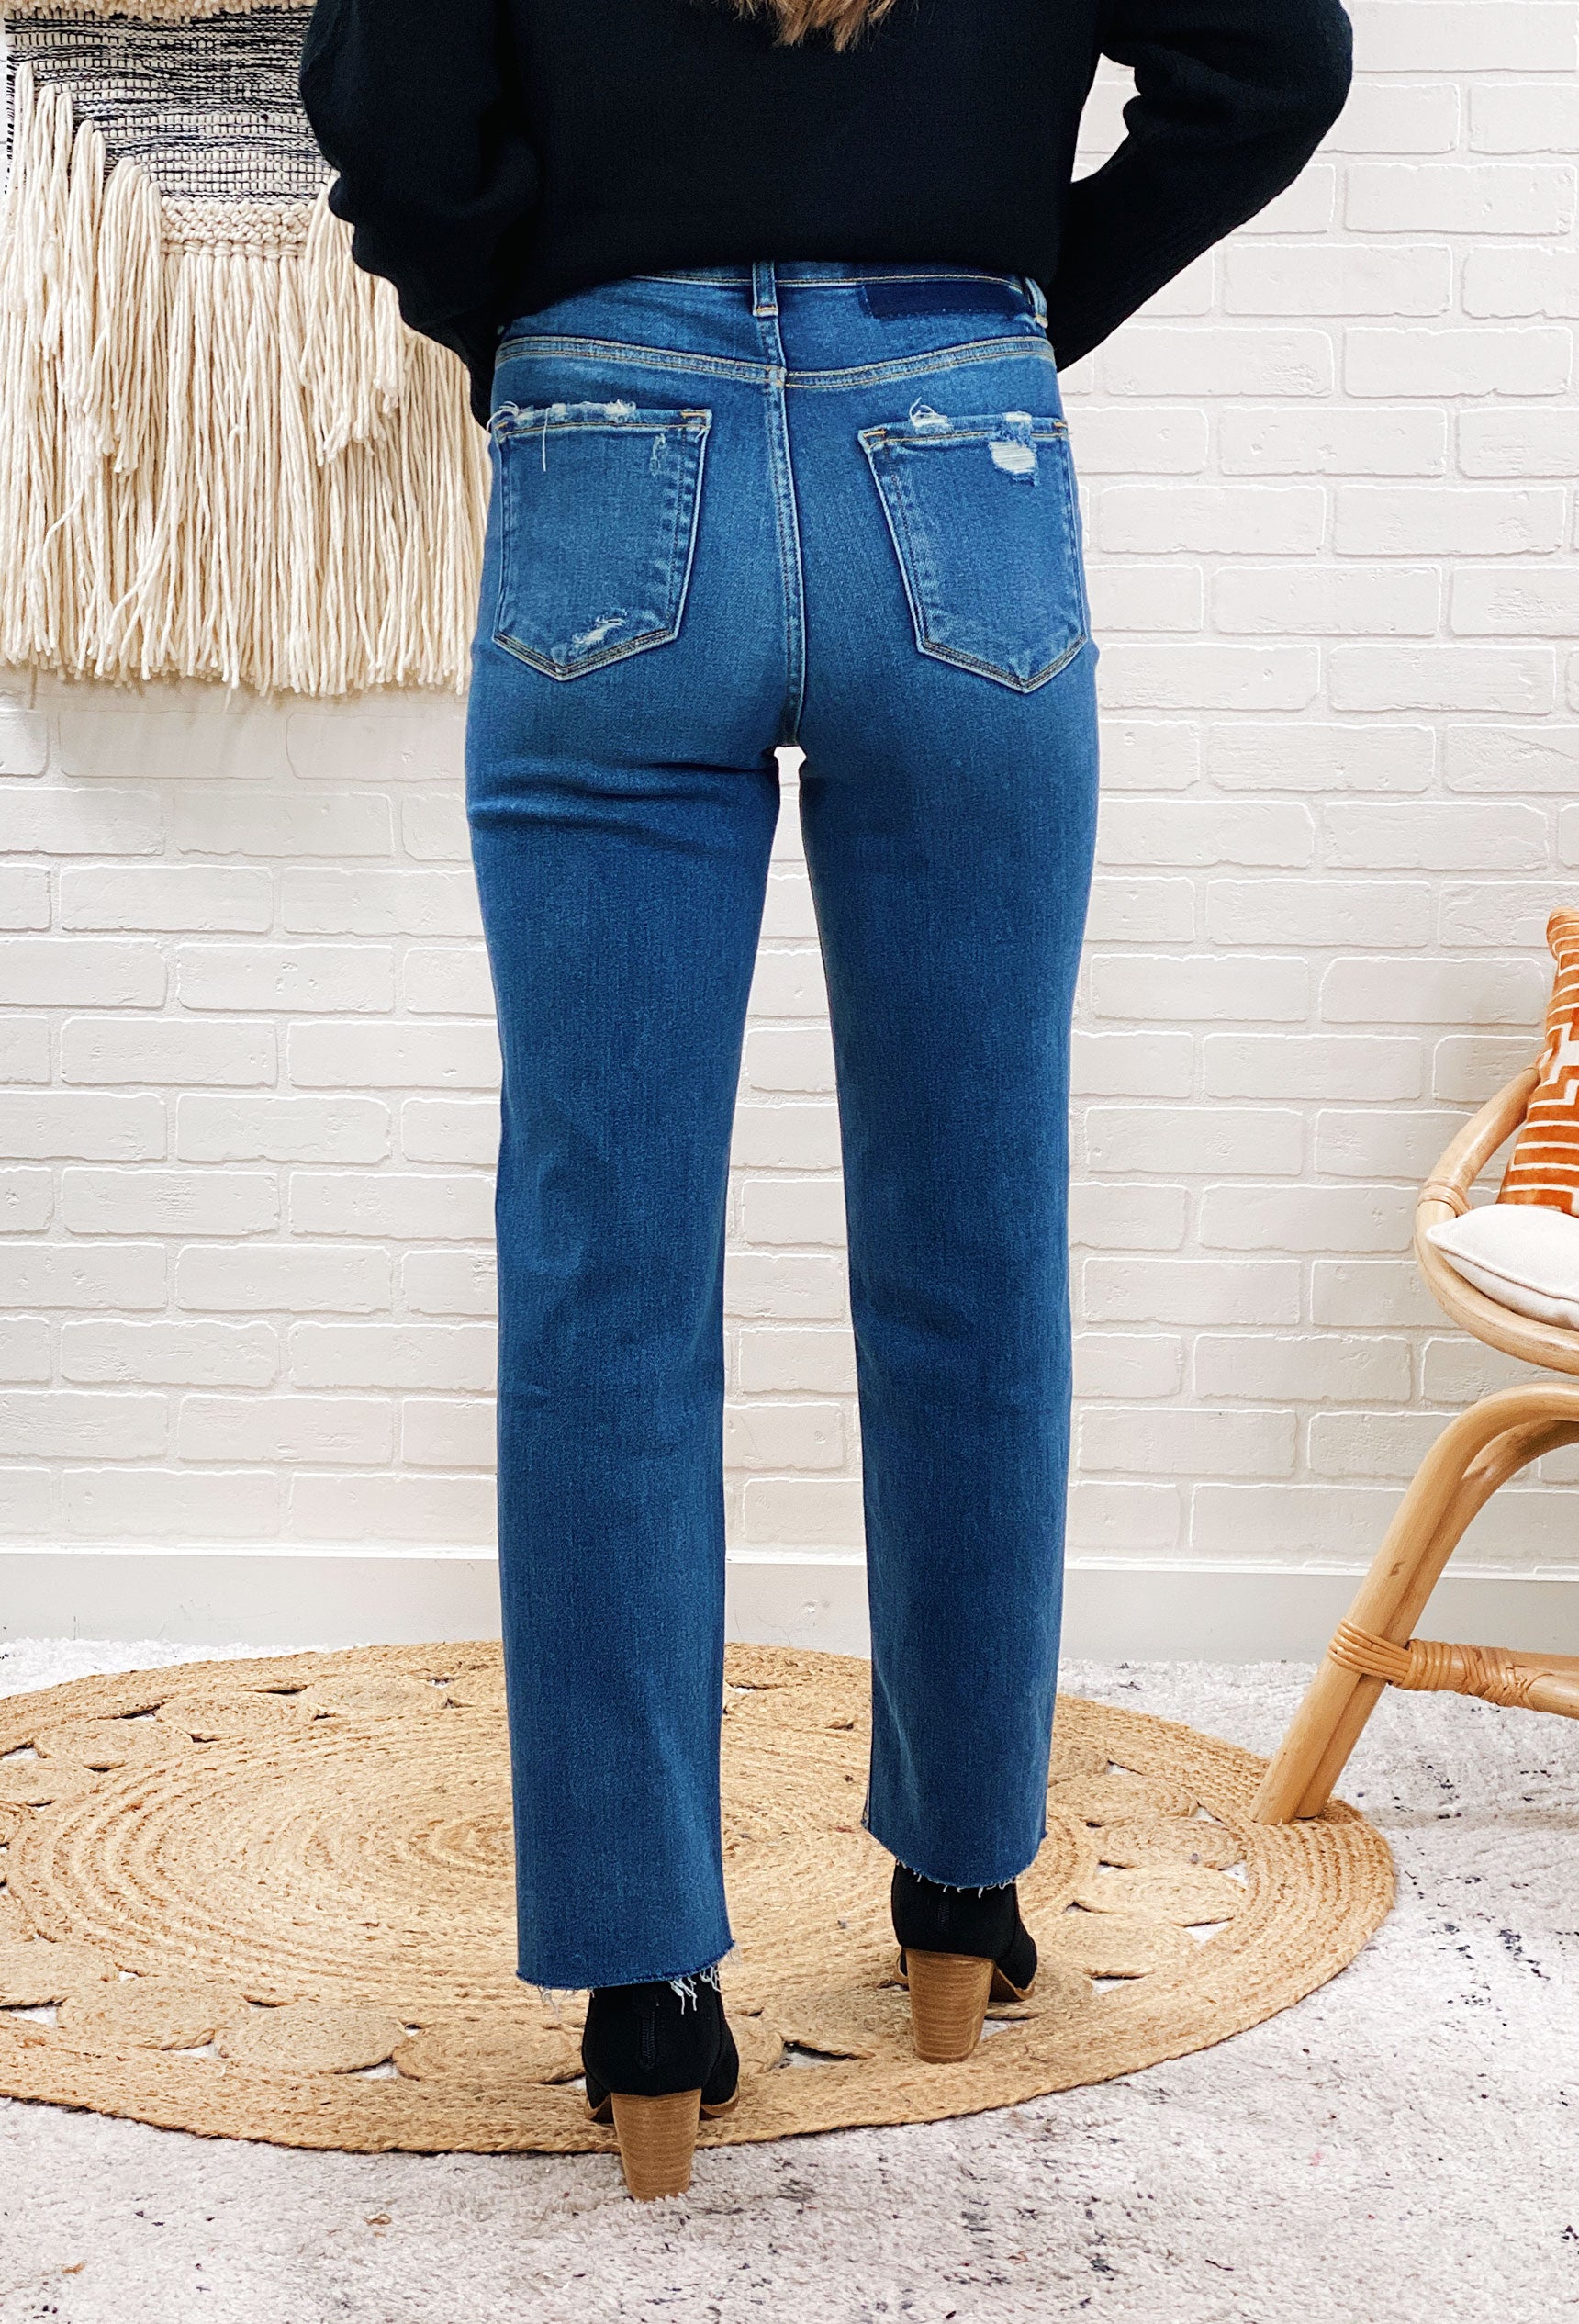 Super High Rise Ankle Straight Jeans, tretch denim with an ankle length, slim fitting through the hips and thighs, raw edge detail, clean-cut hem, high rise waist